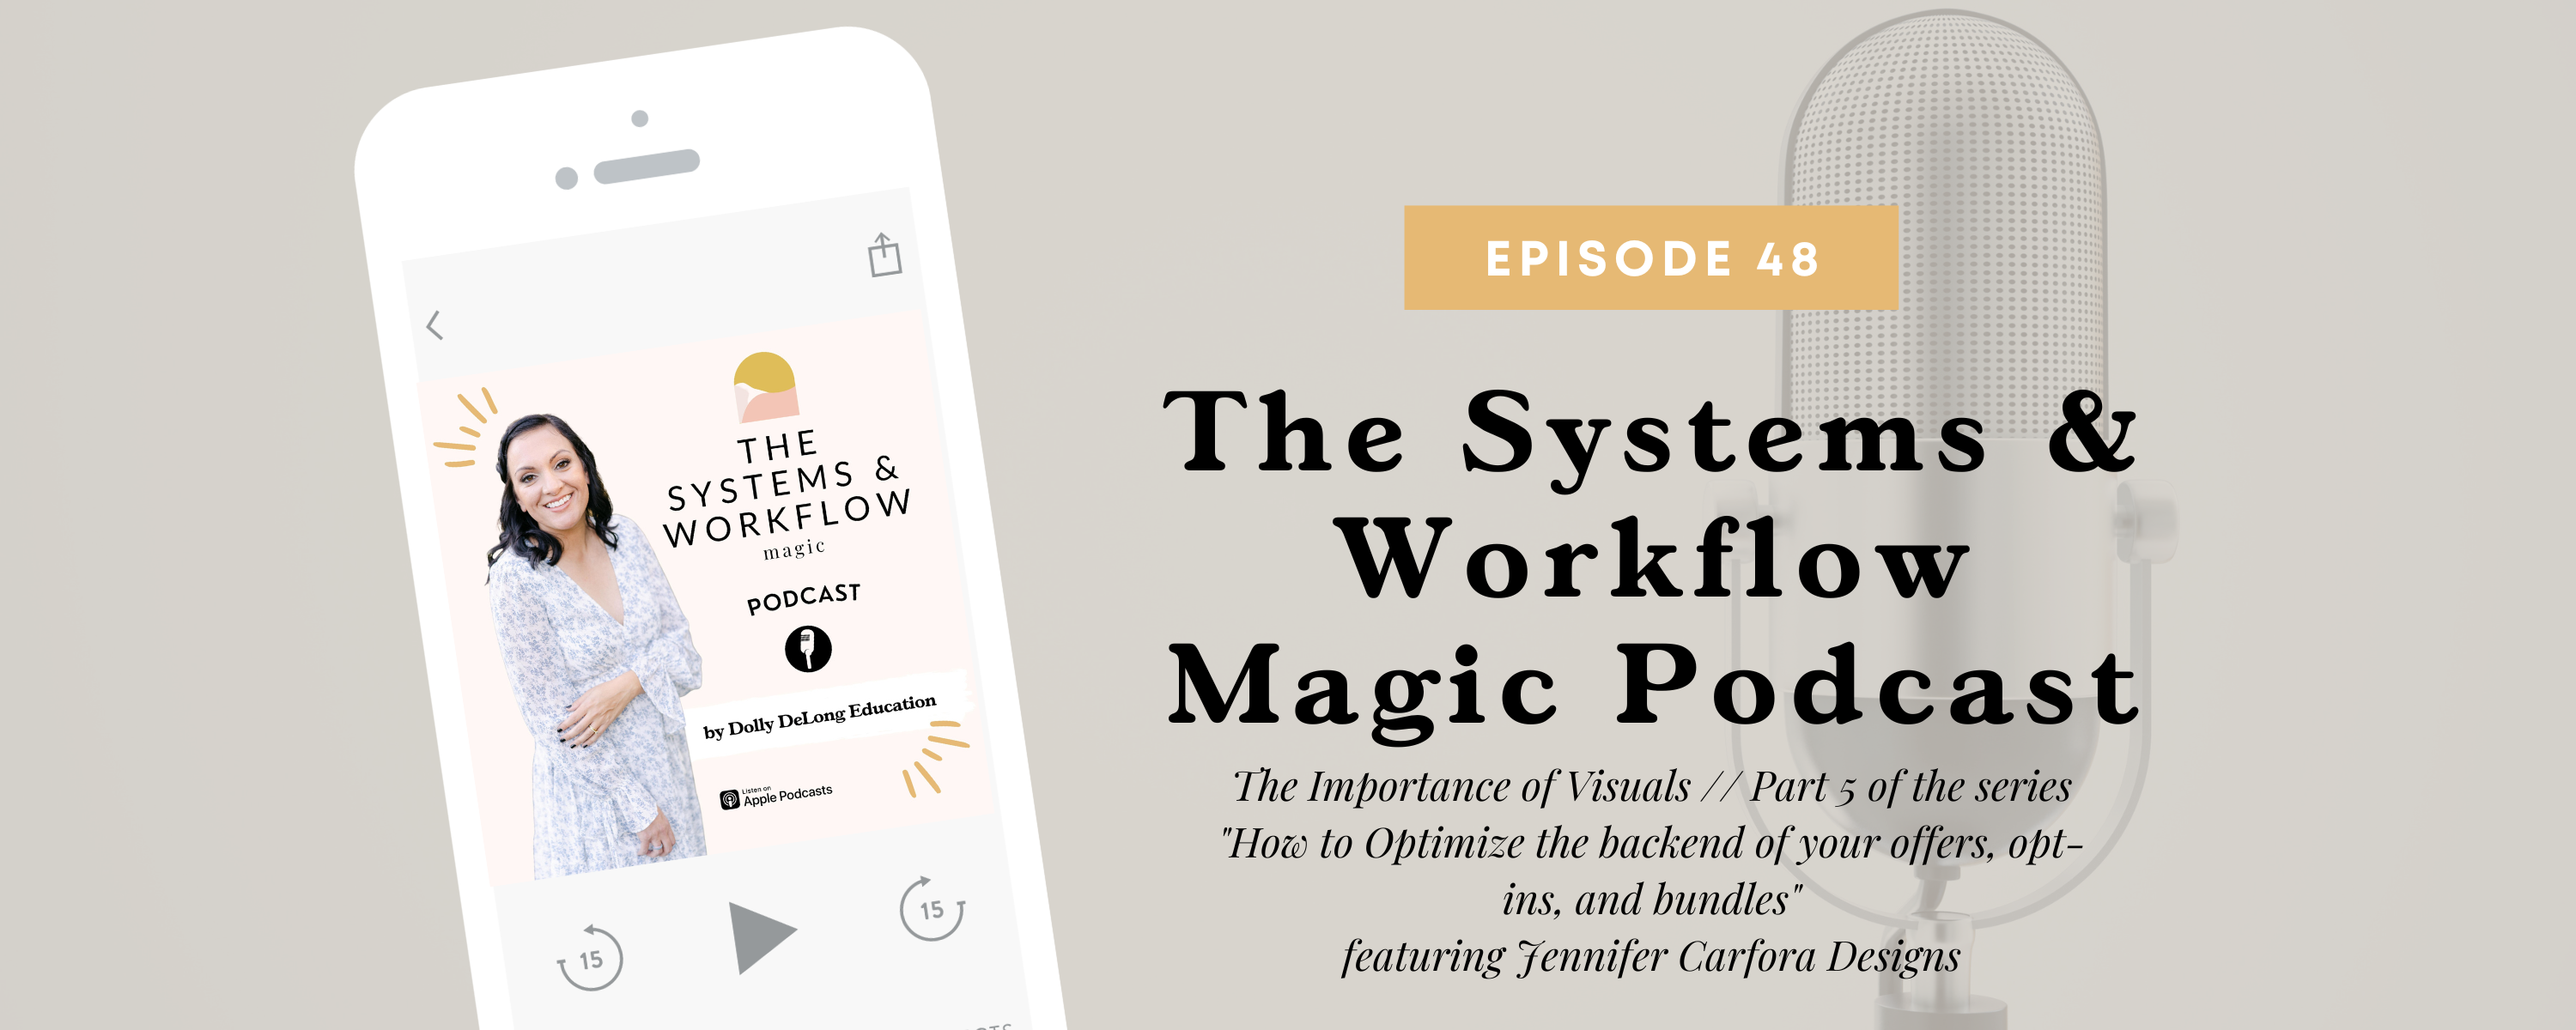 48: Week 5 of the series How to Automate & Streamline the Backend of your Lead Magnets and Offers - How to Incorporate Visuals featuring Jennifer Carfora